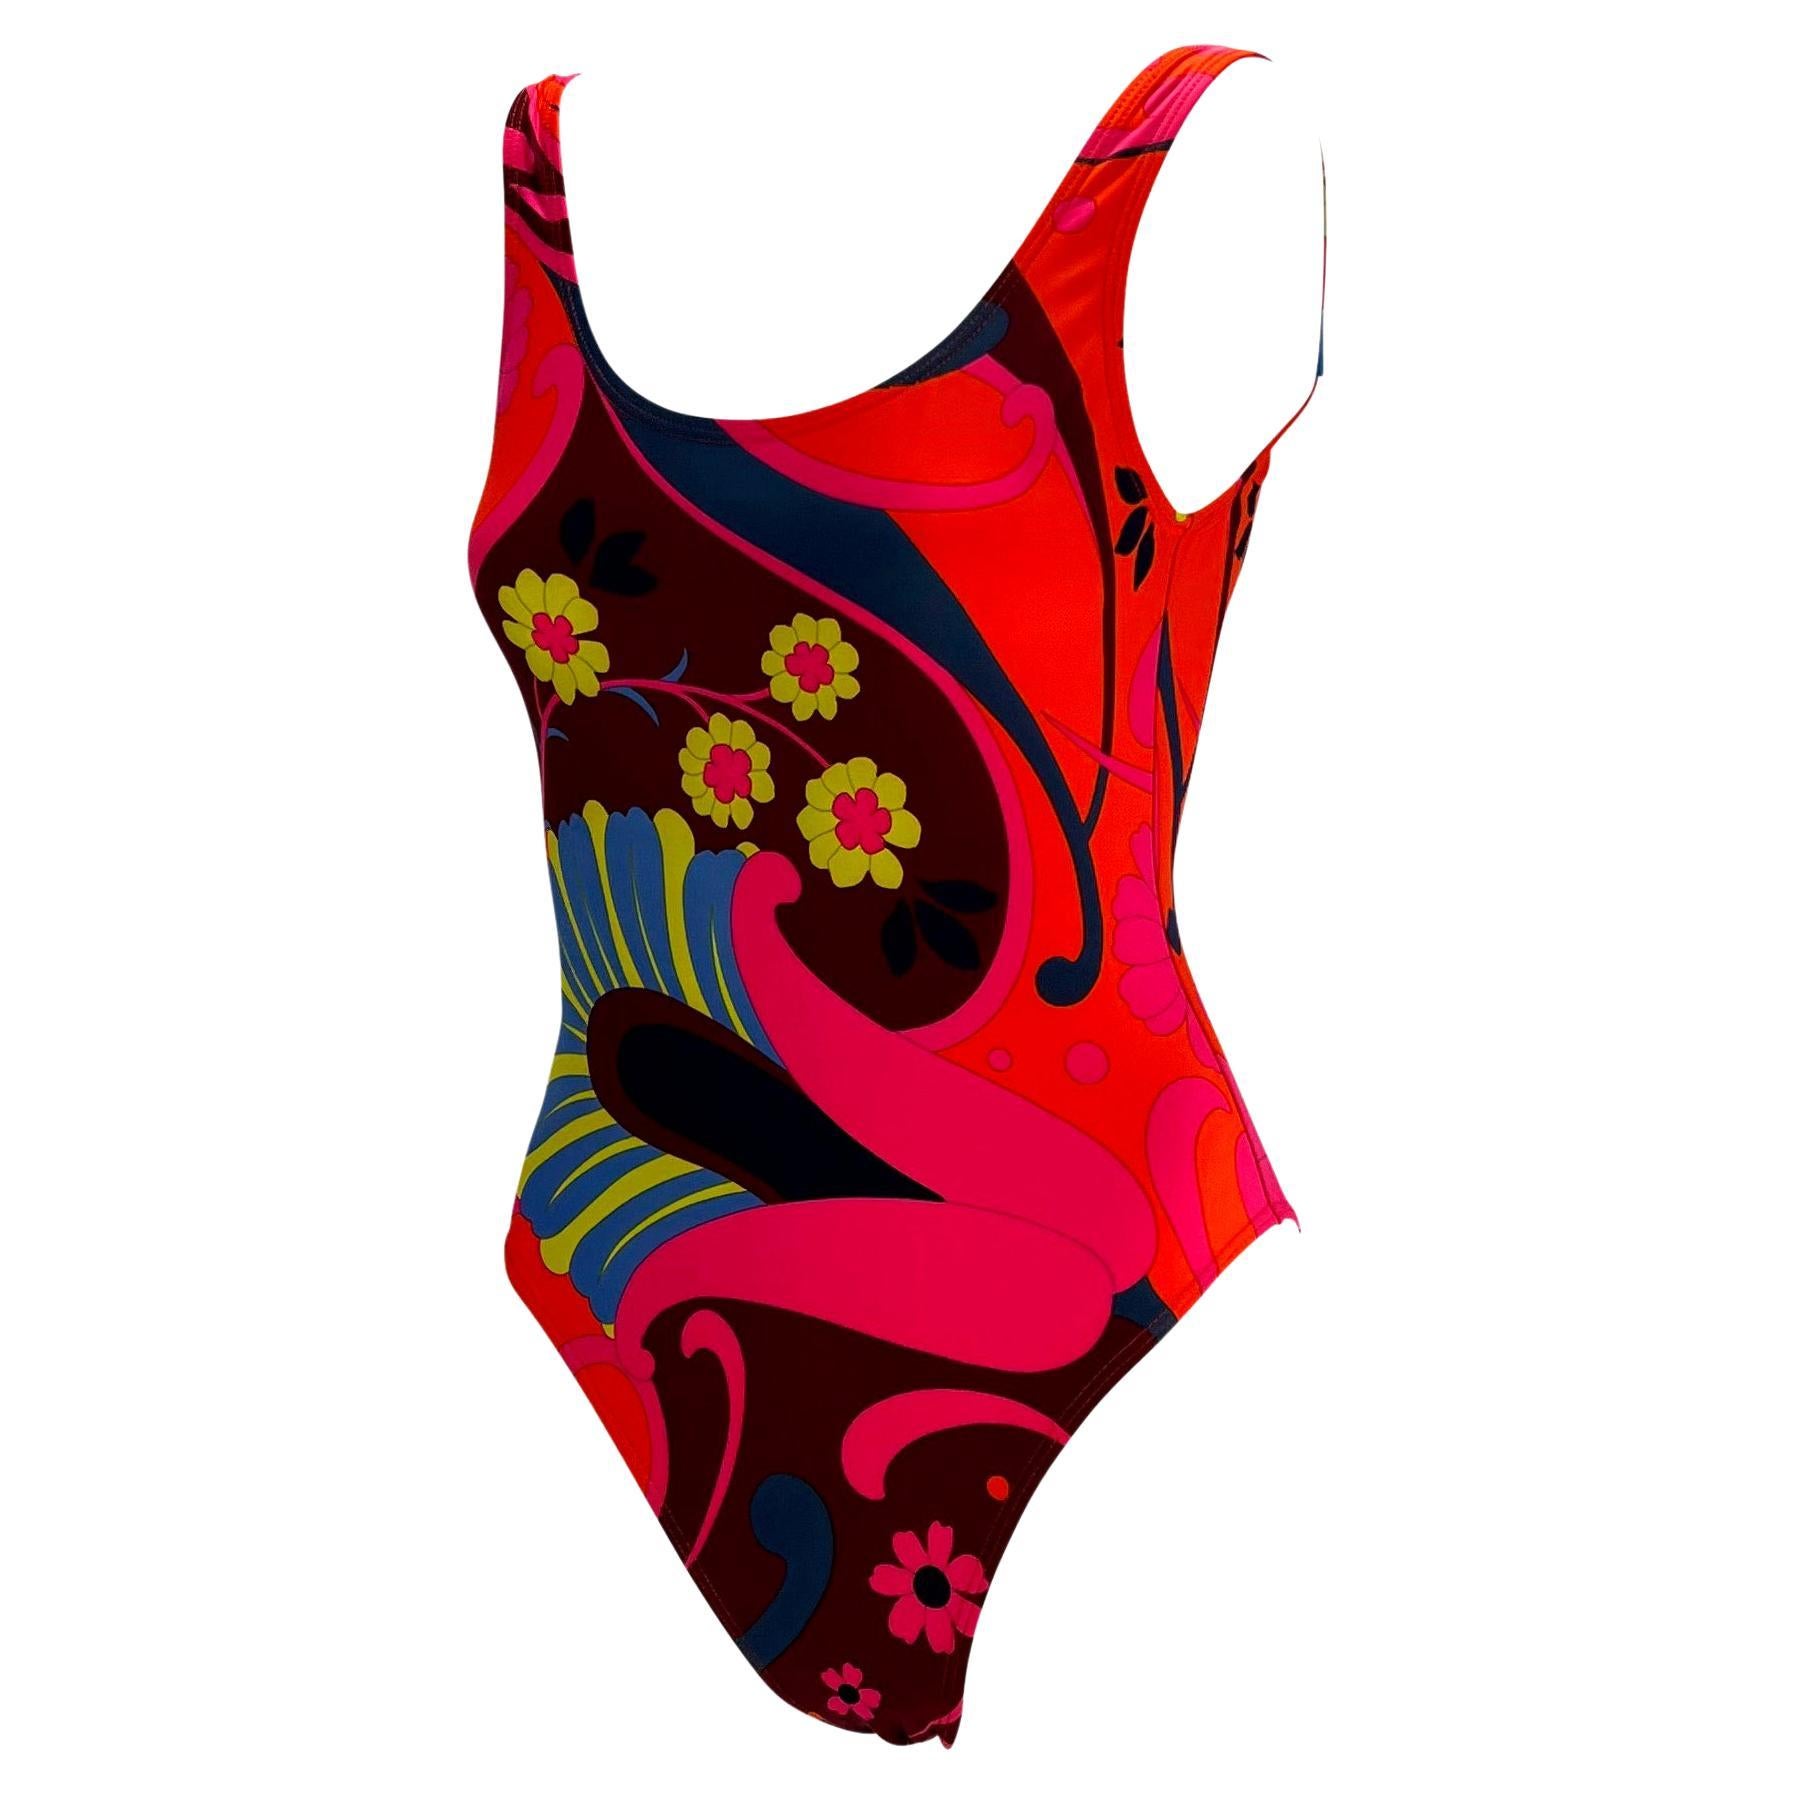 Presenting a gorgeous groovy floral one piece Gucci swimsuit, designed by Tom Ford. From the Spring/Summer 1999 collection, this swimsuit sports a bold hippy inspired print. Featuring a pink/orange floral motif, this one piece is made complete with